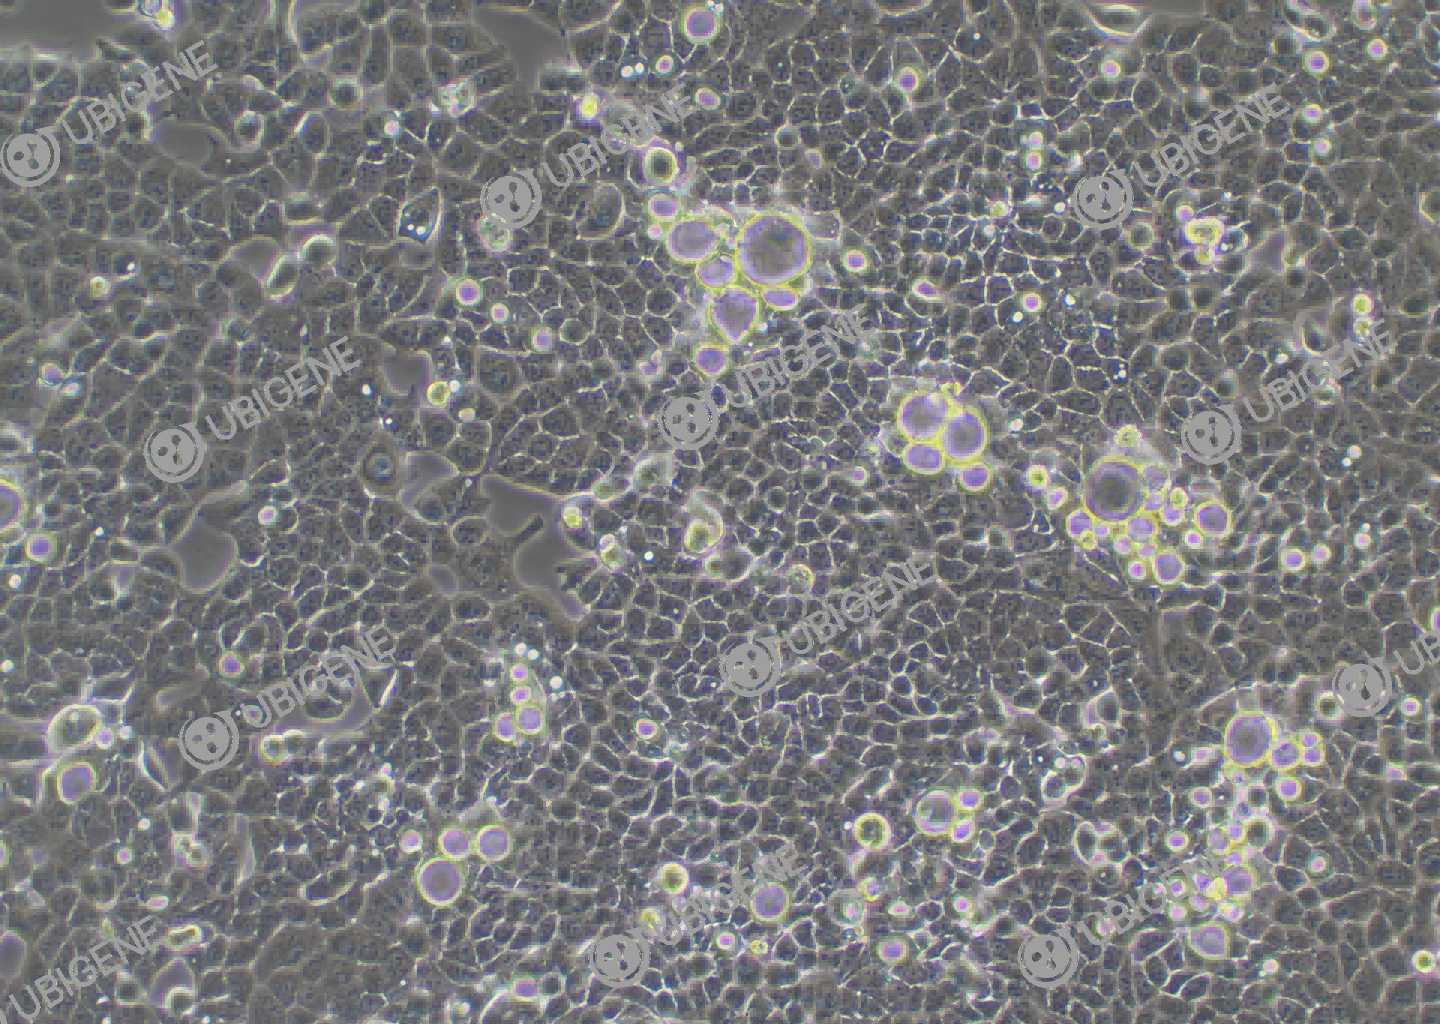 HEC-1-B cell line Cultured cell morphology